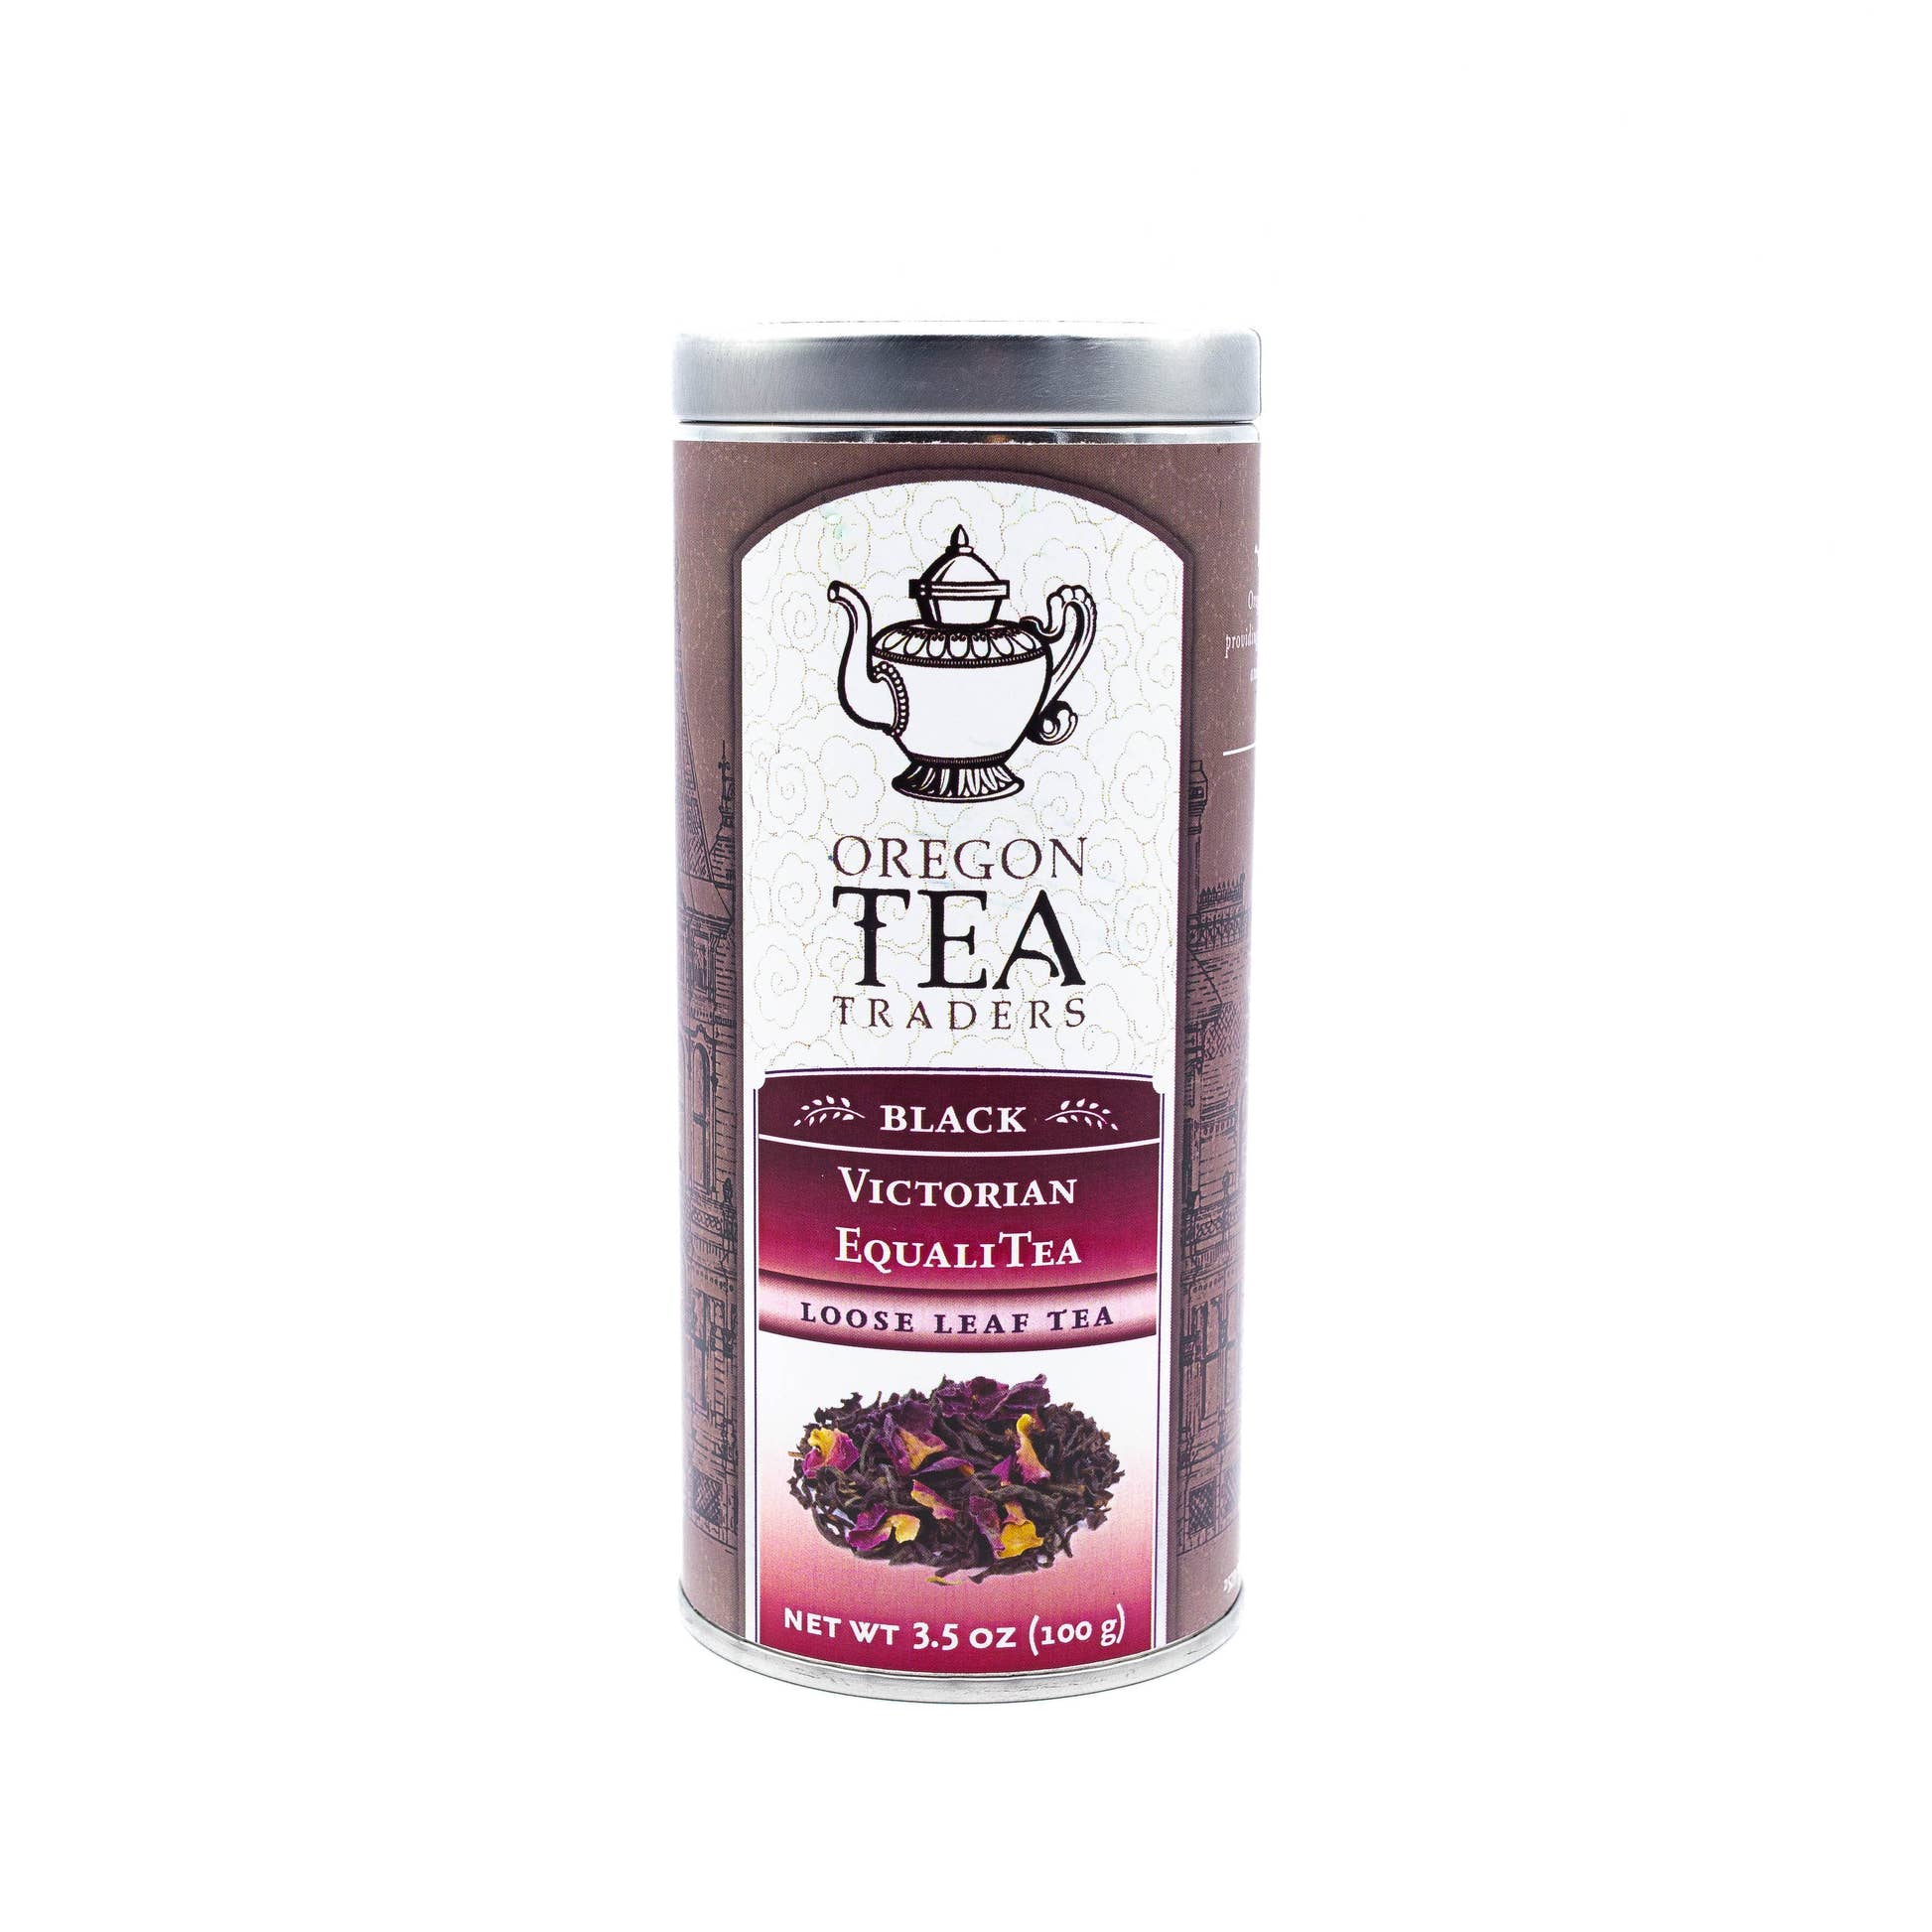 Shop Victorian EqualiTea by Oregon Tea Traders at Sips by